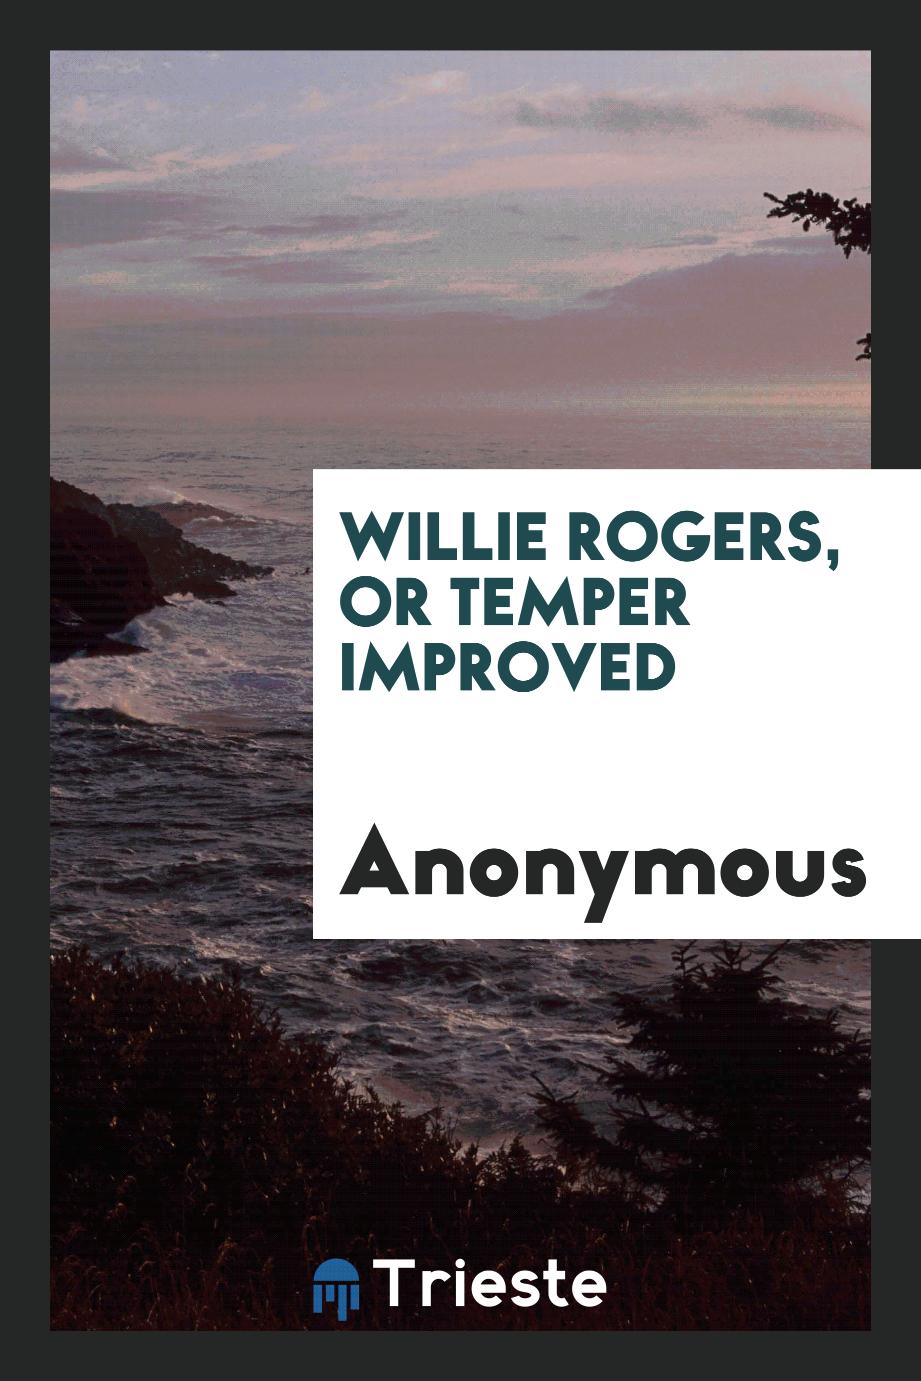 Willie Rogers, or Temper Improved